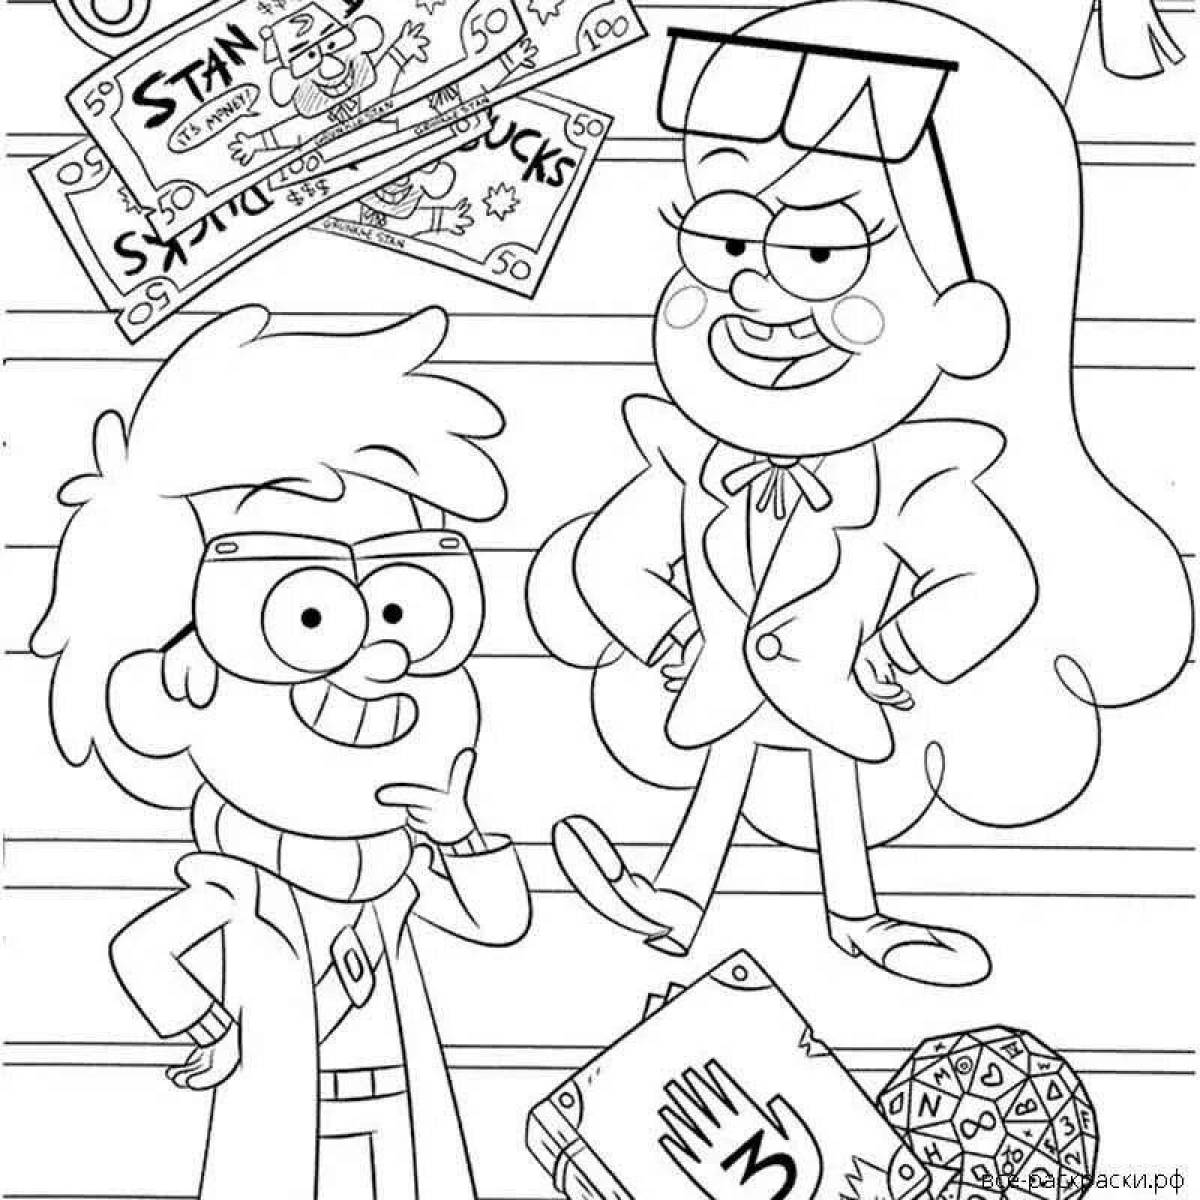 Fabulous dipper coloring page